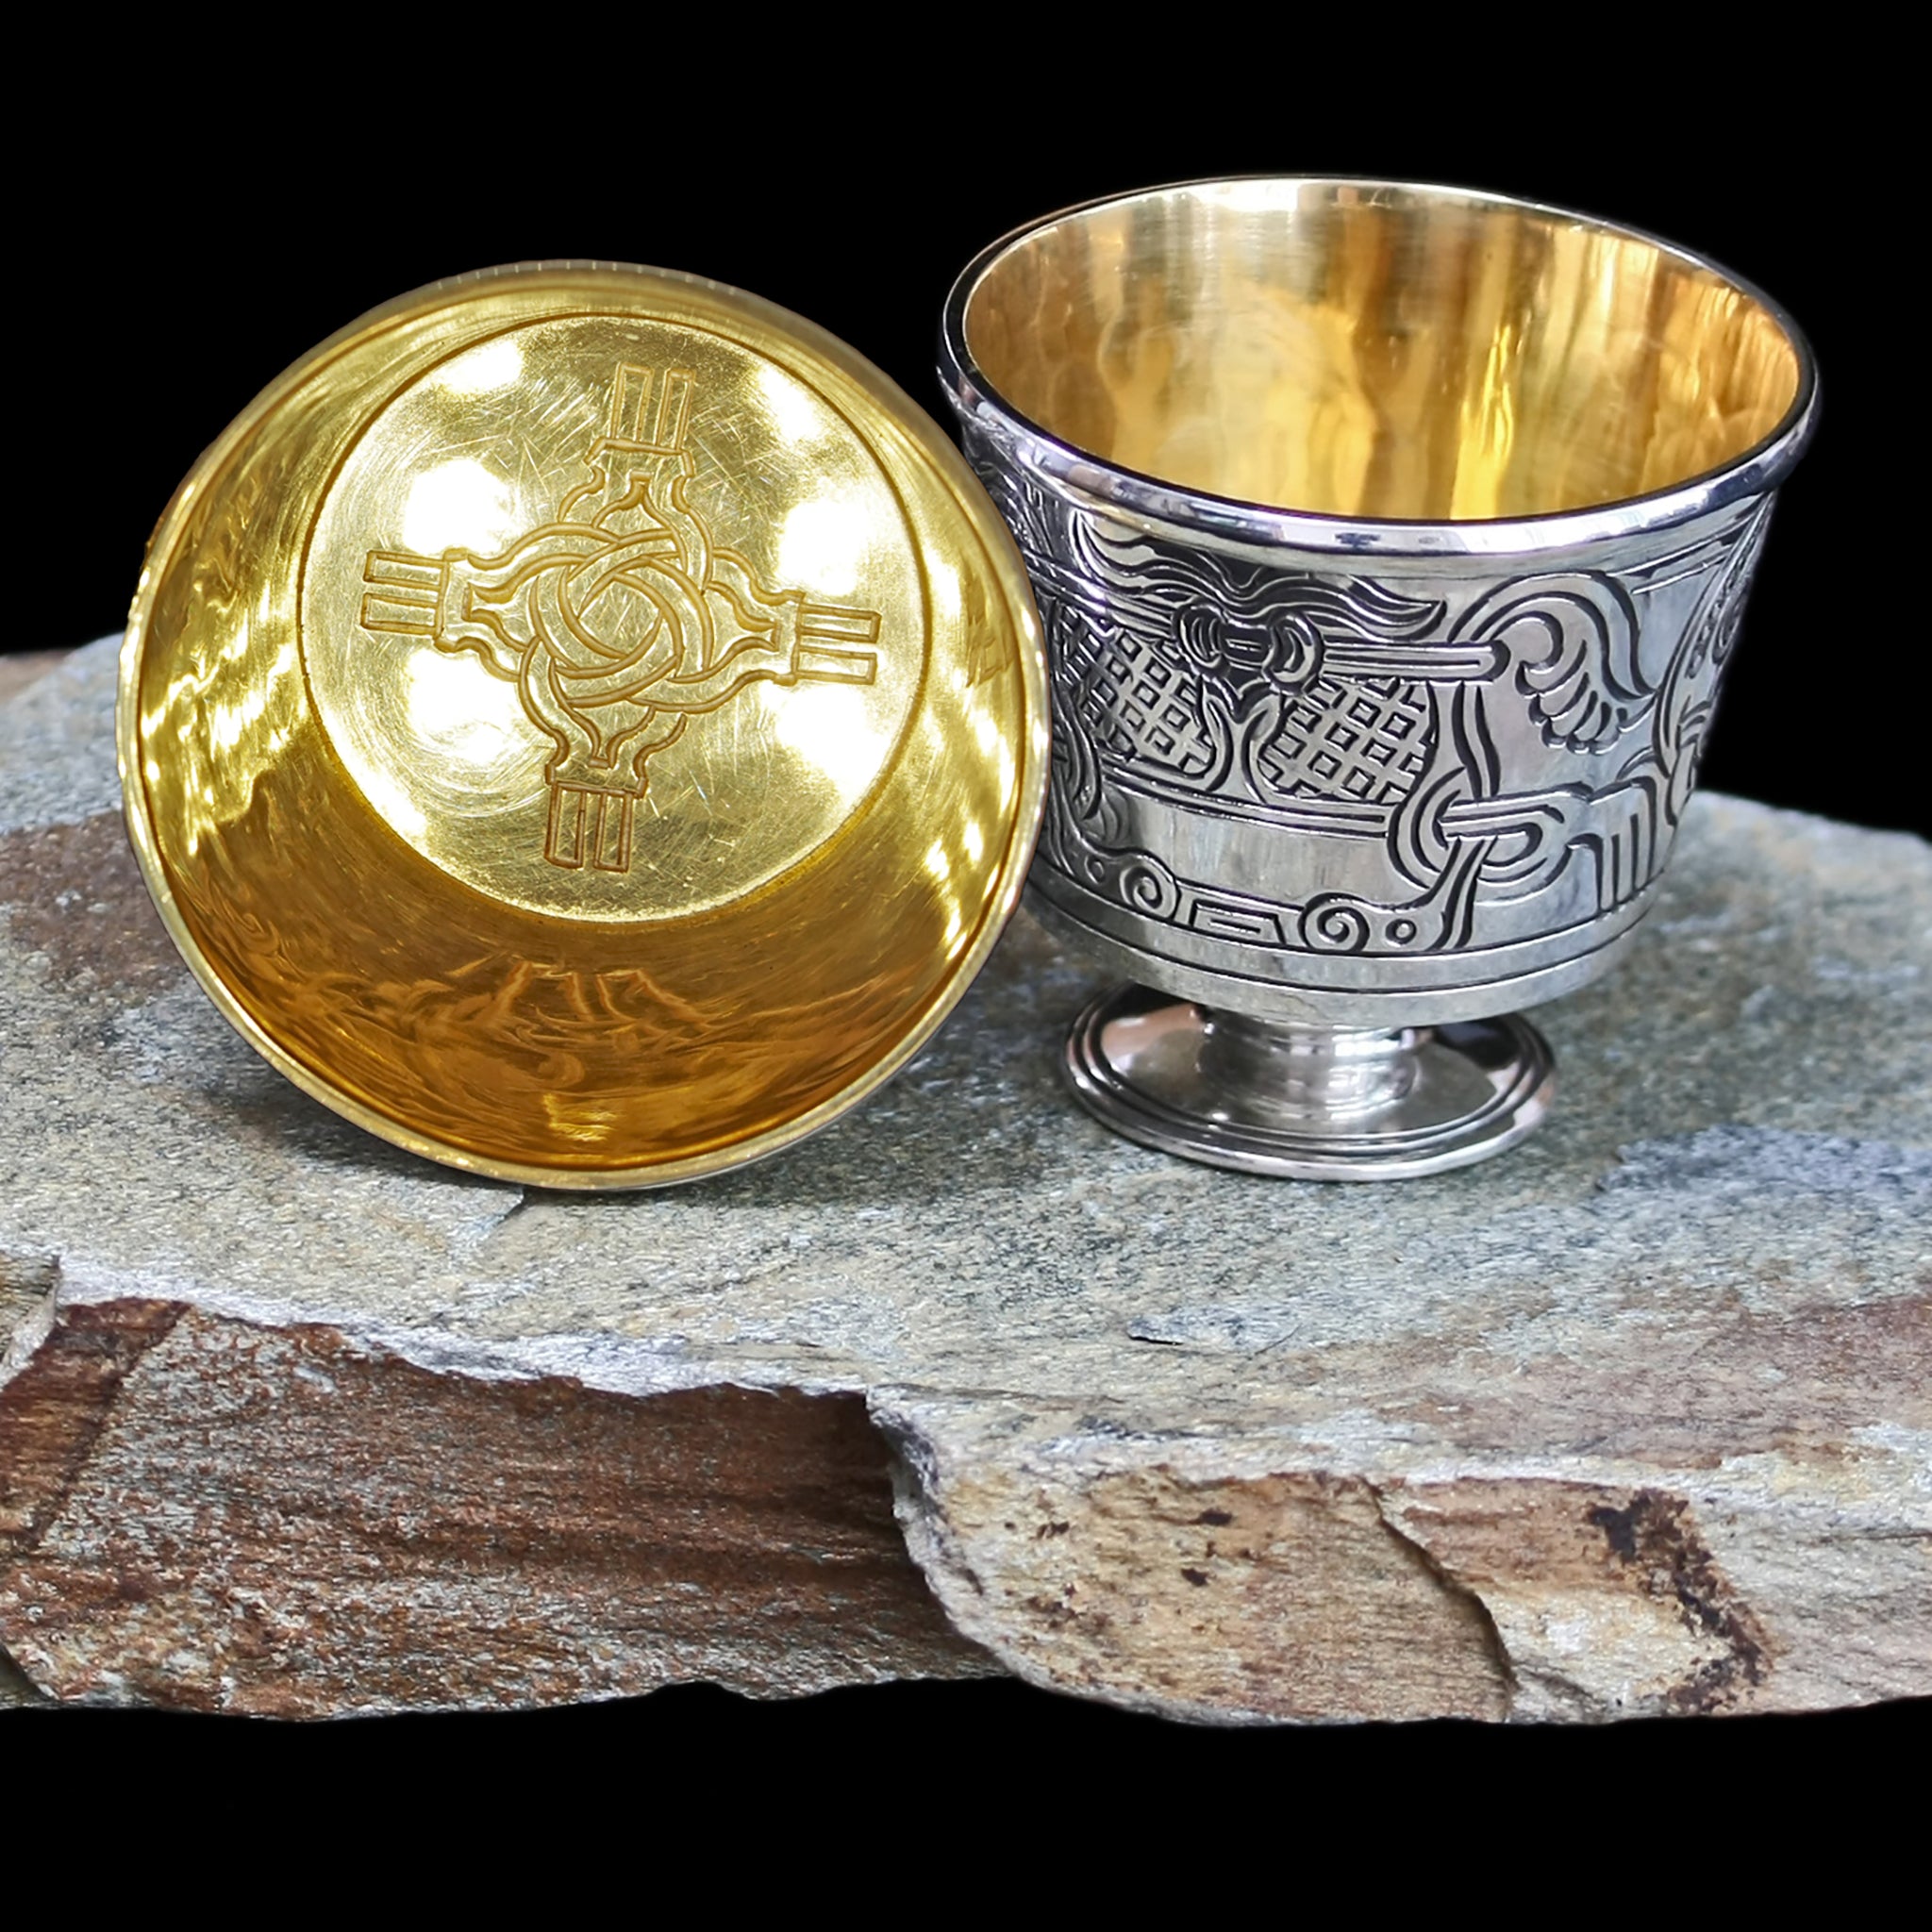 Handmade Silver and Gold Replica Jelling Cups with Knotwork Design